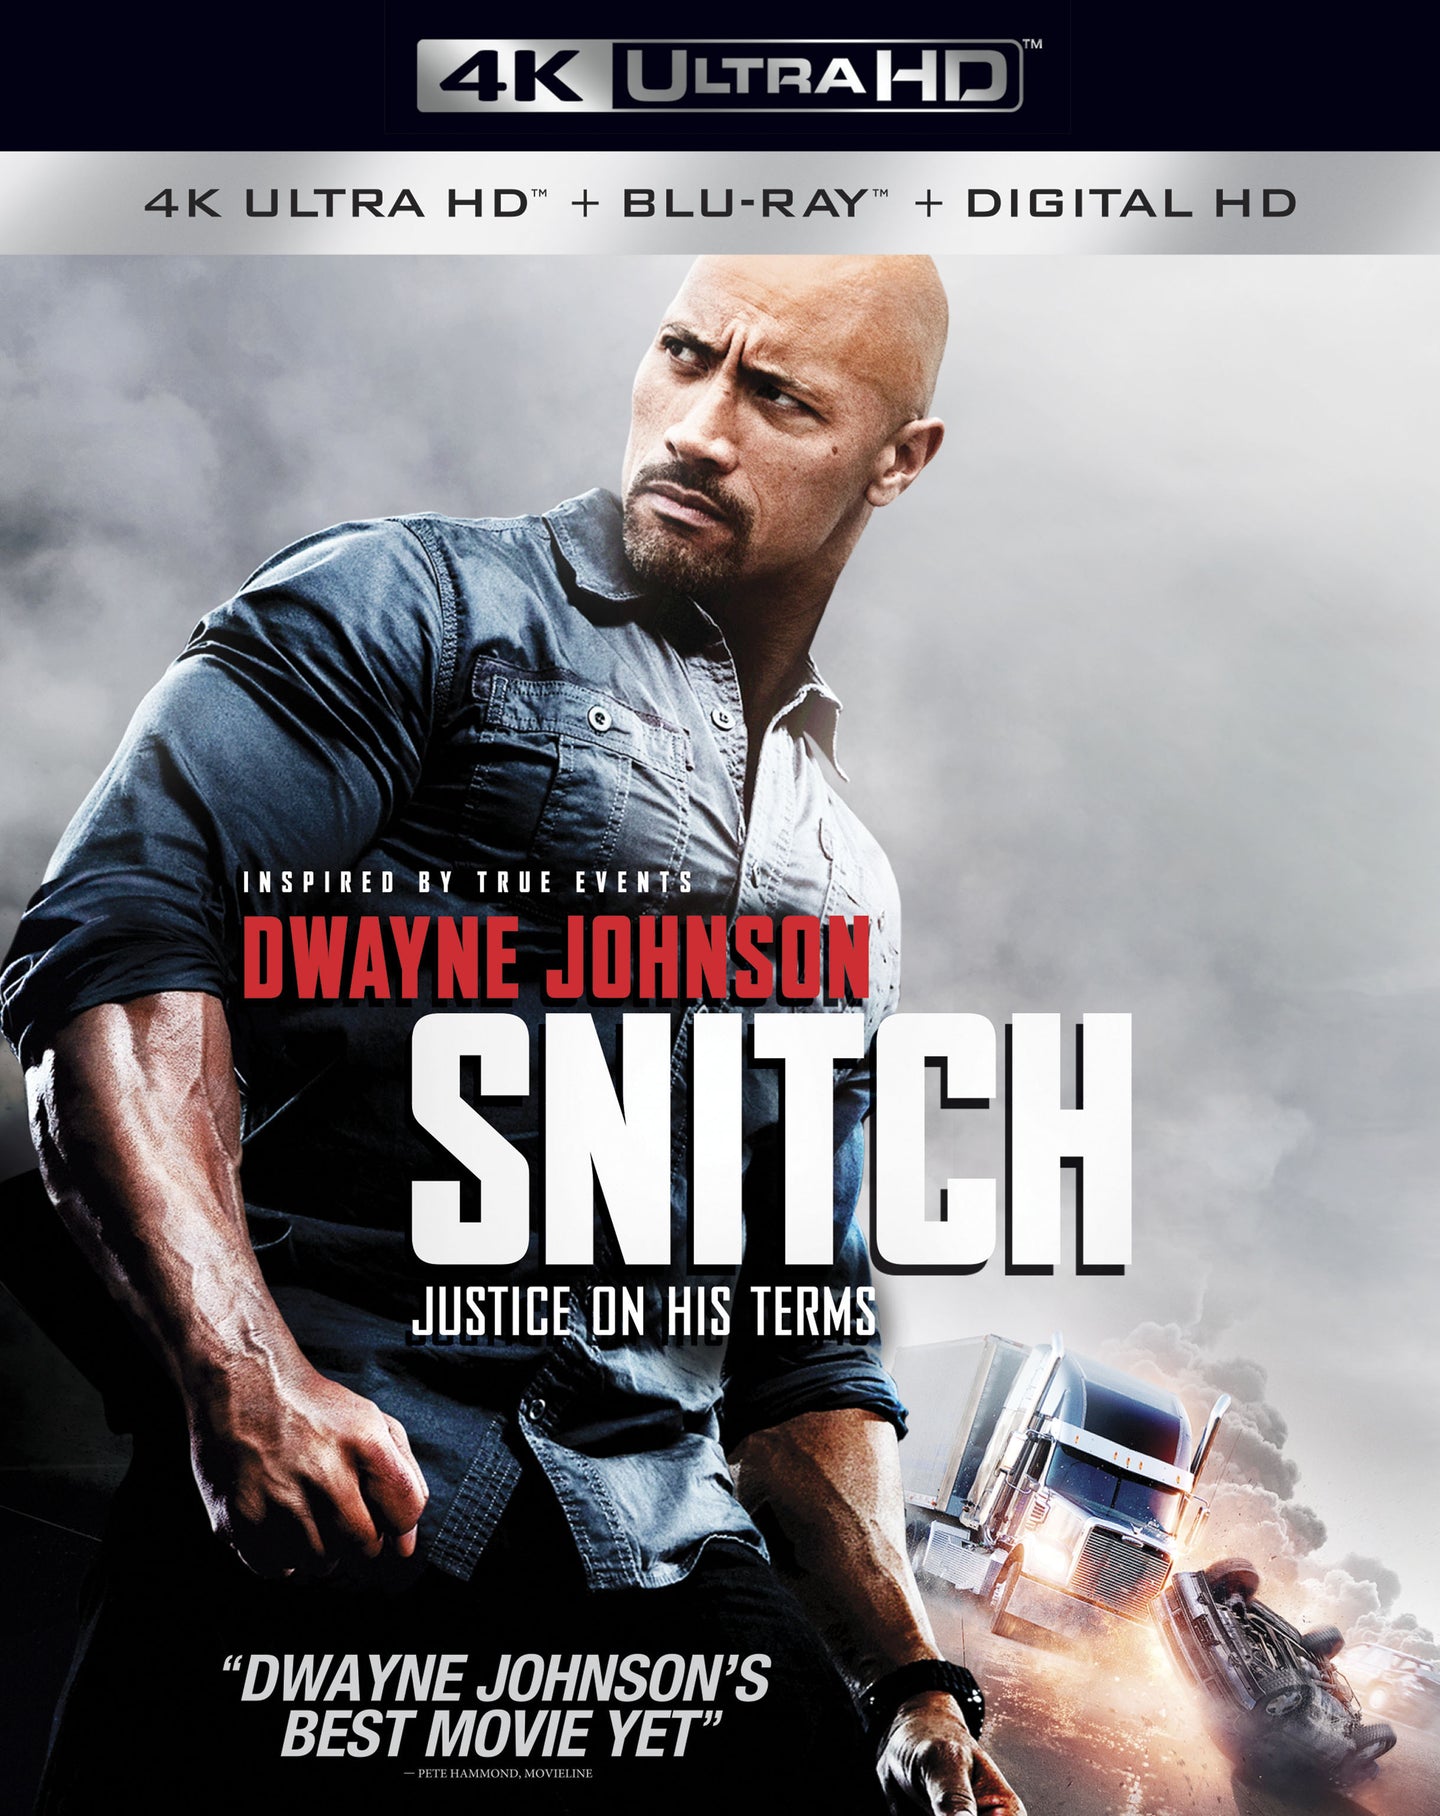 Snitch (2013) iTunes 4K redemption only